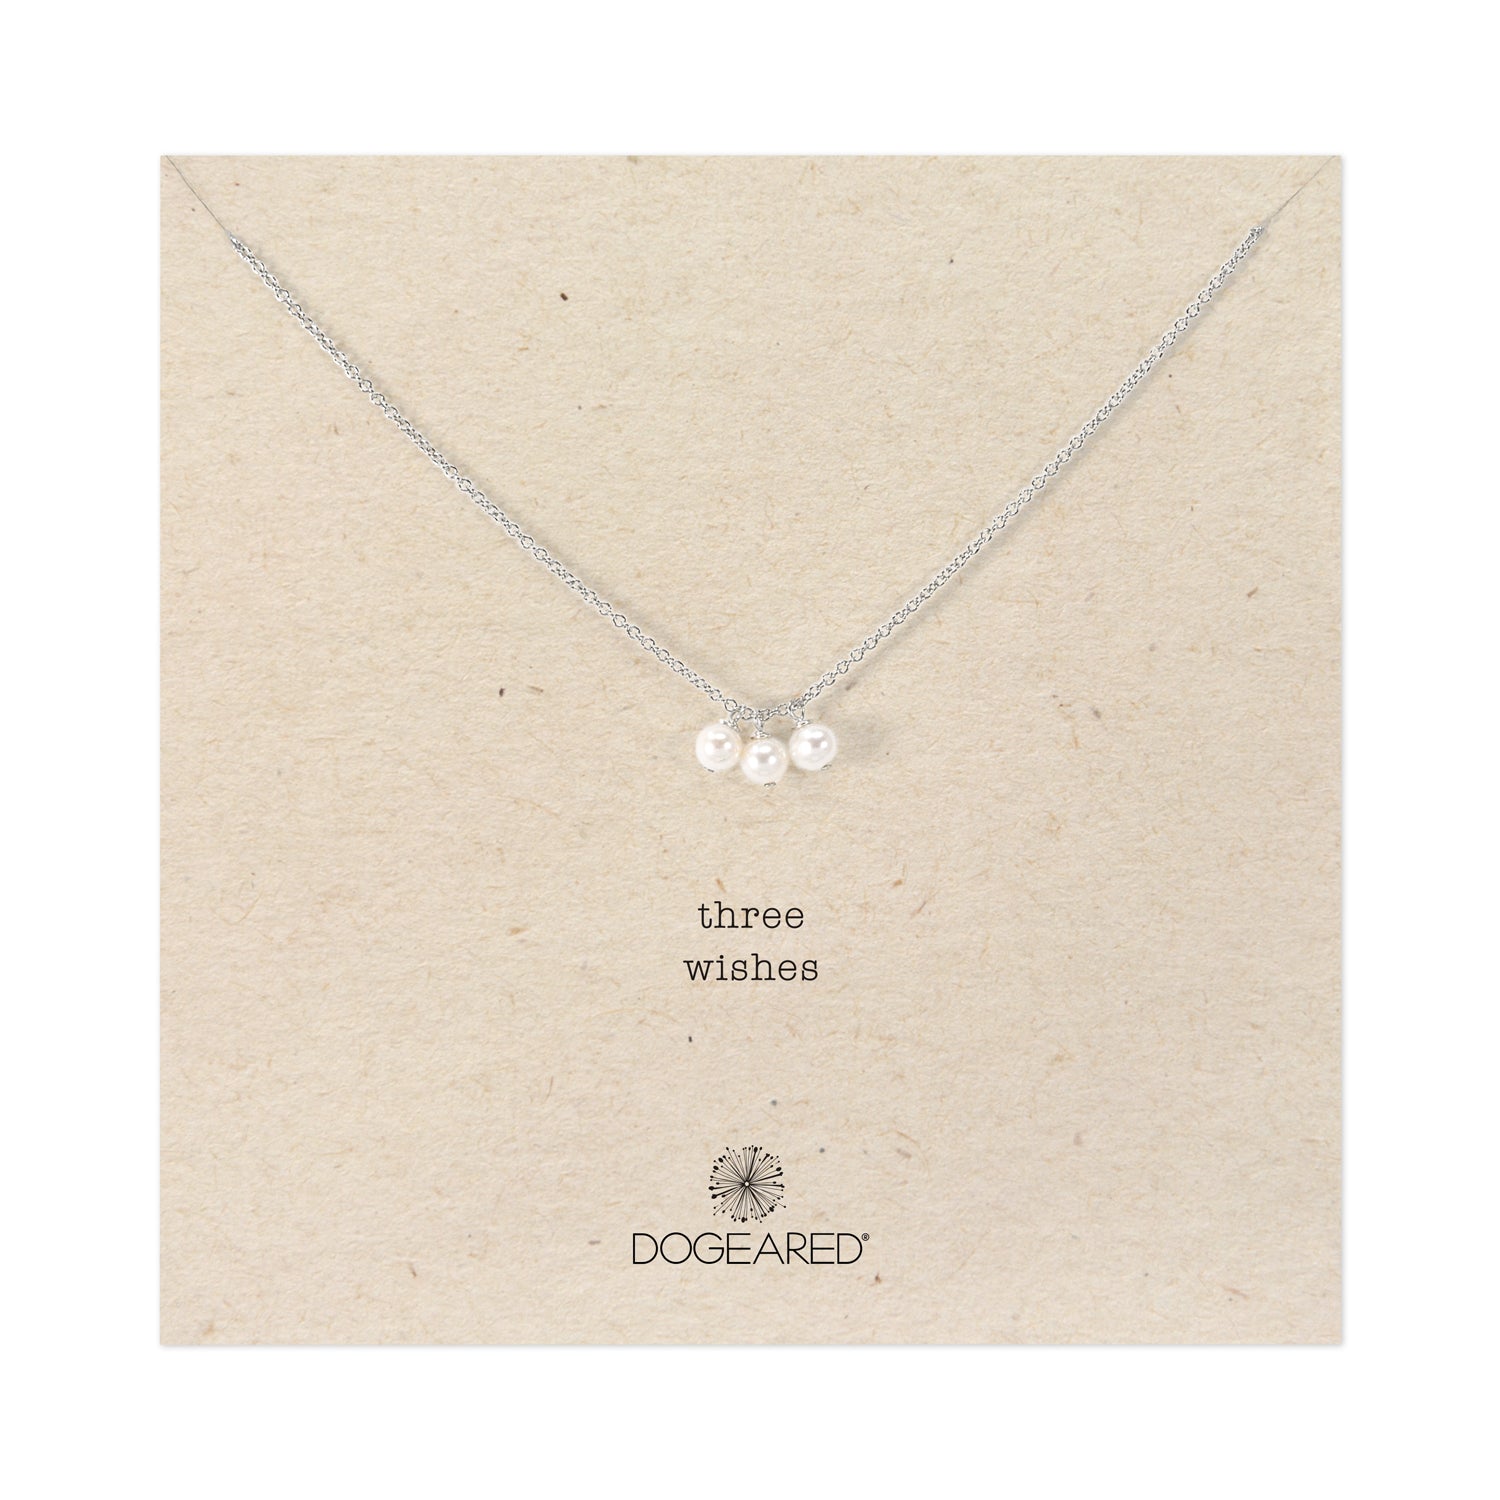 three wishes with three pearls necklace